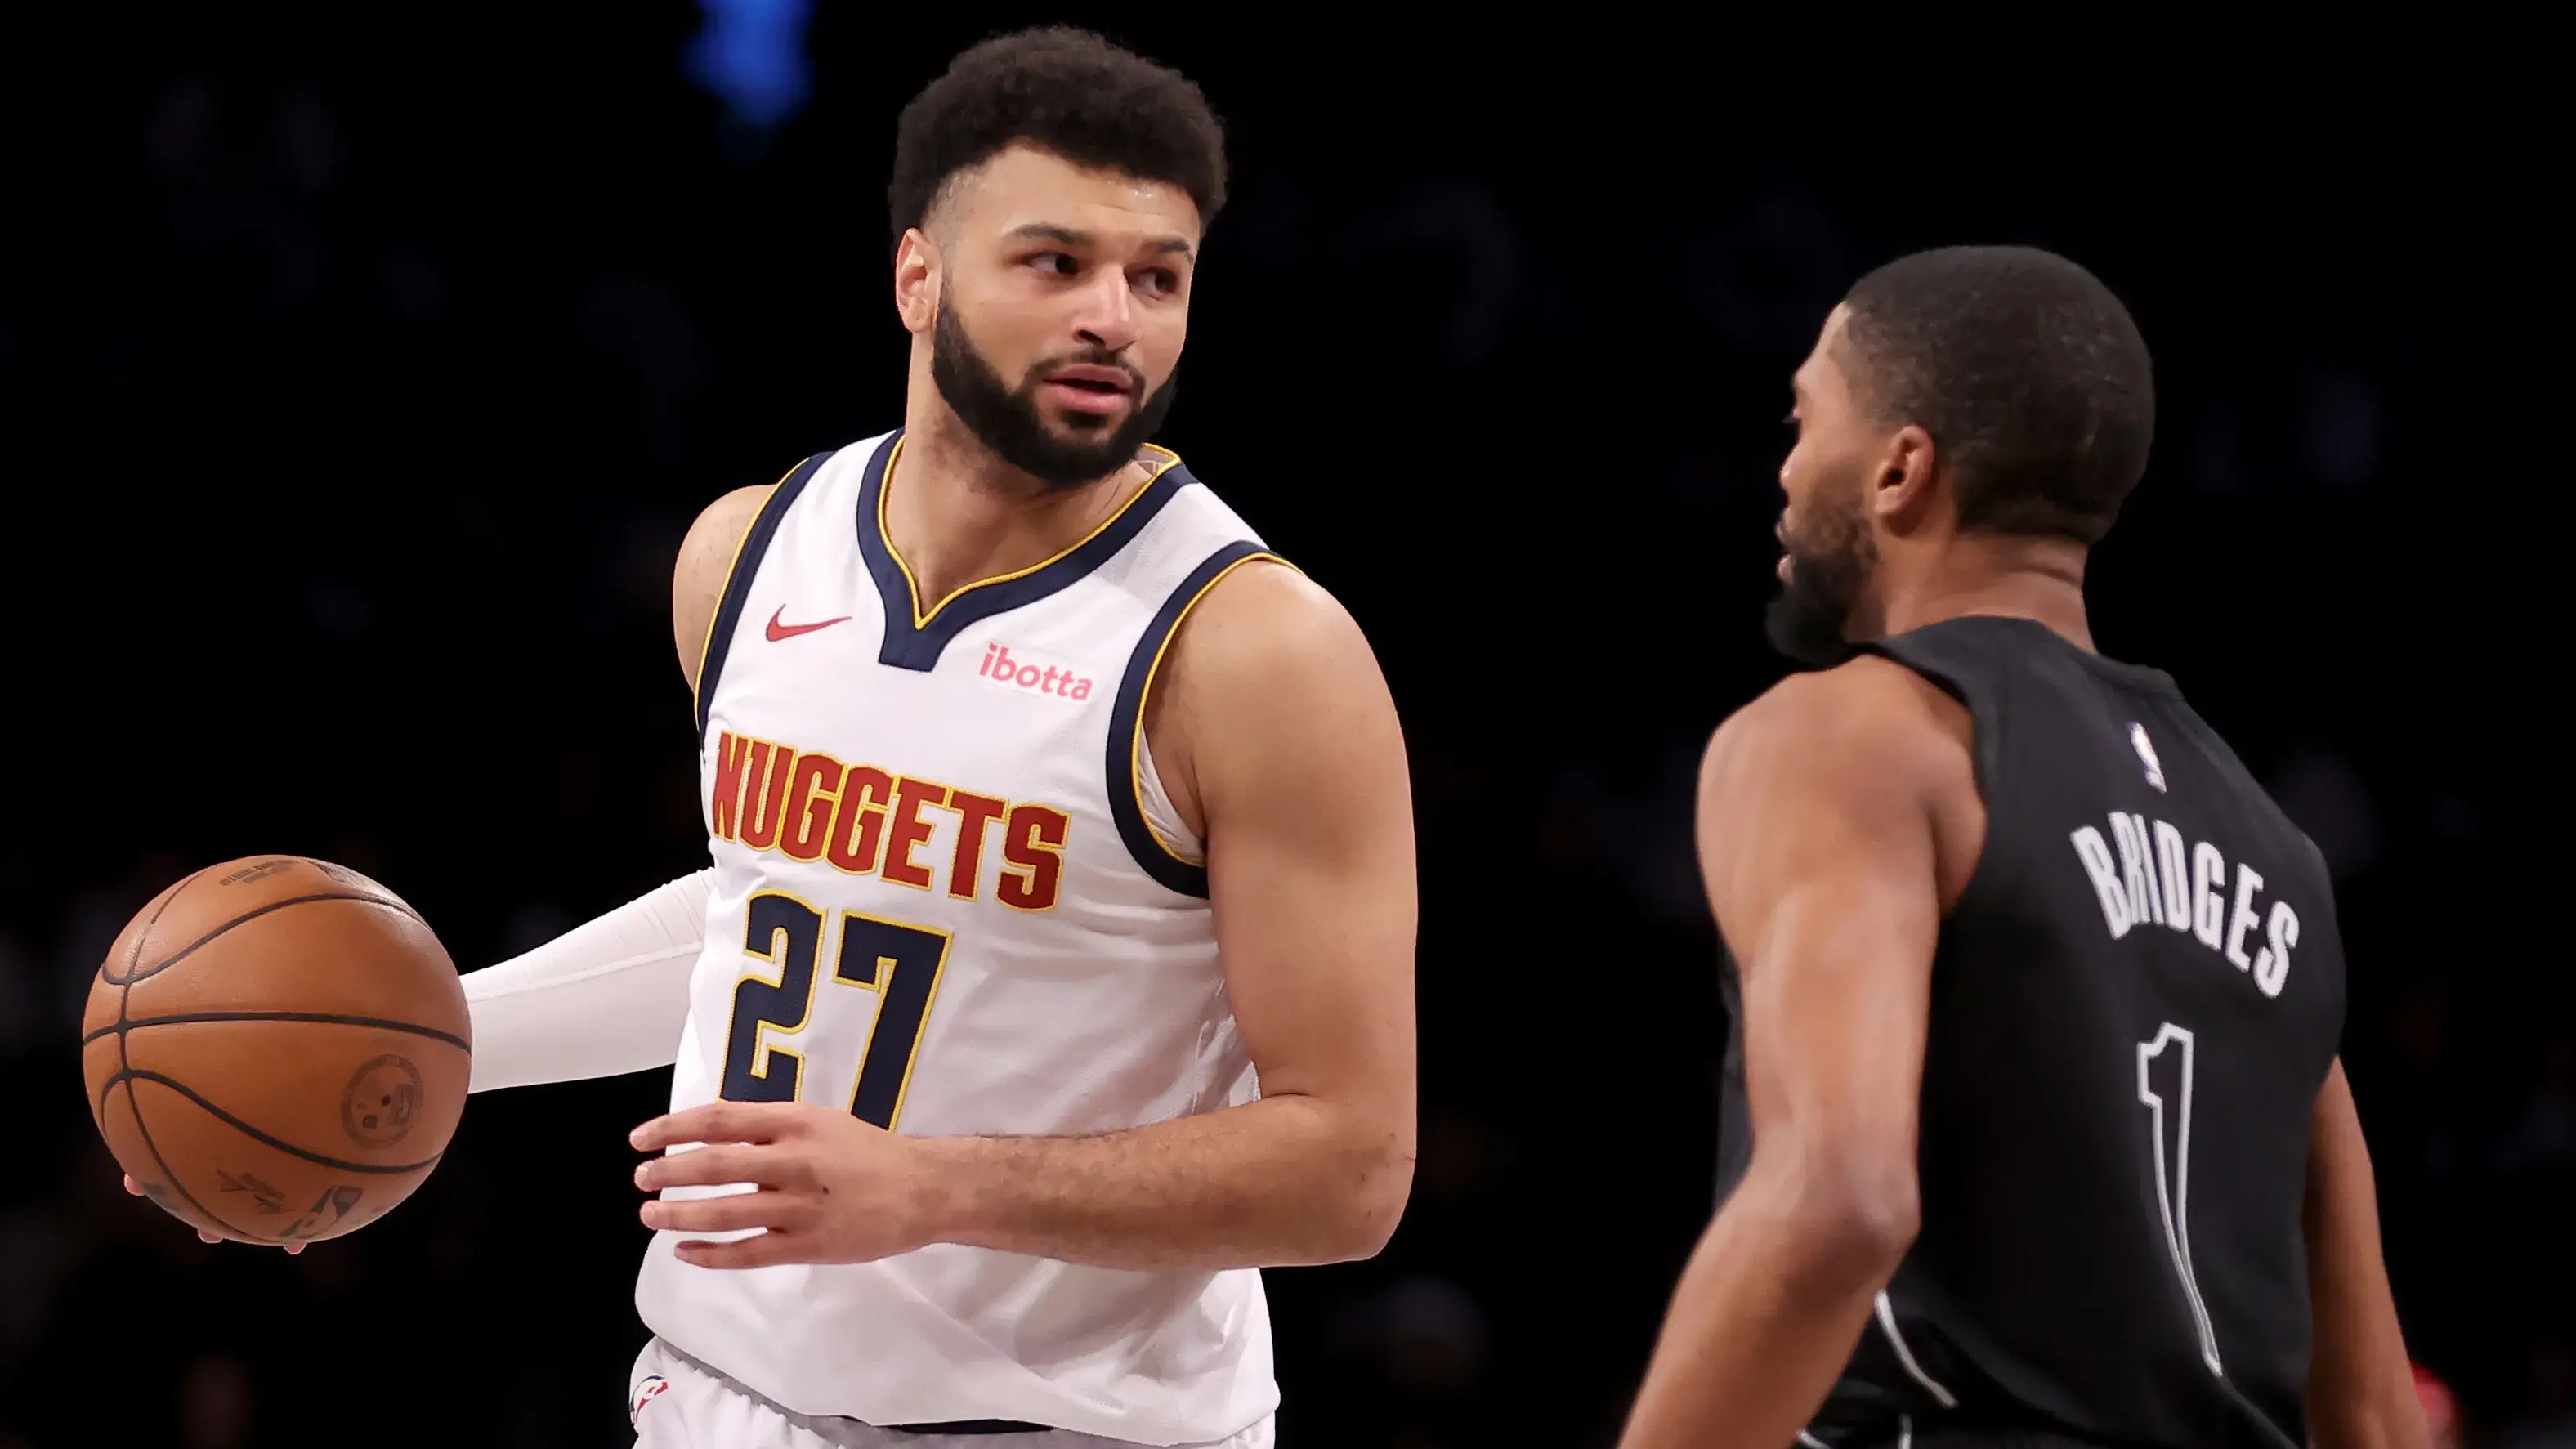 Denver Nuggets guard Jamal Murray (27) controls the ball against Brooklyn Nets forward Mikal Bridges (1) during the first quarter at Barclays Center / Brad Penner - USA TODAY Sports